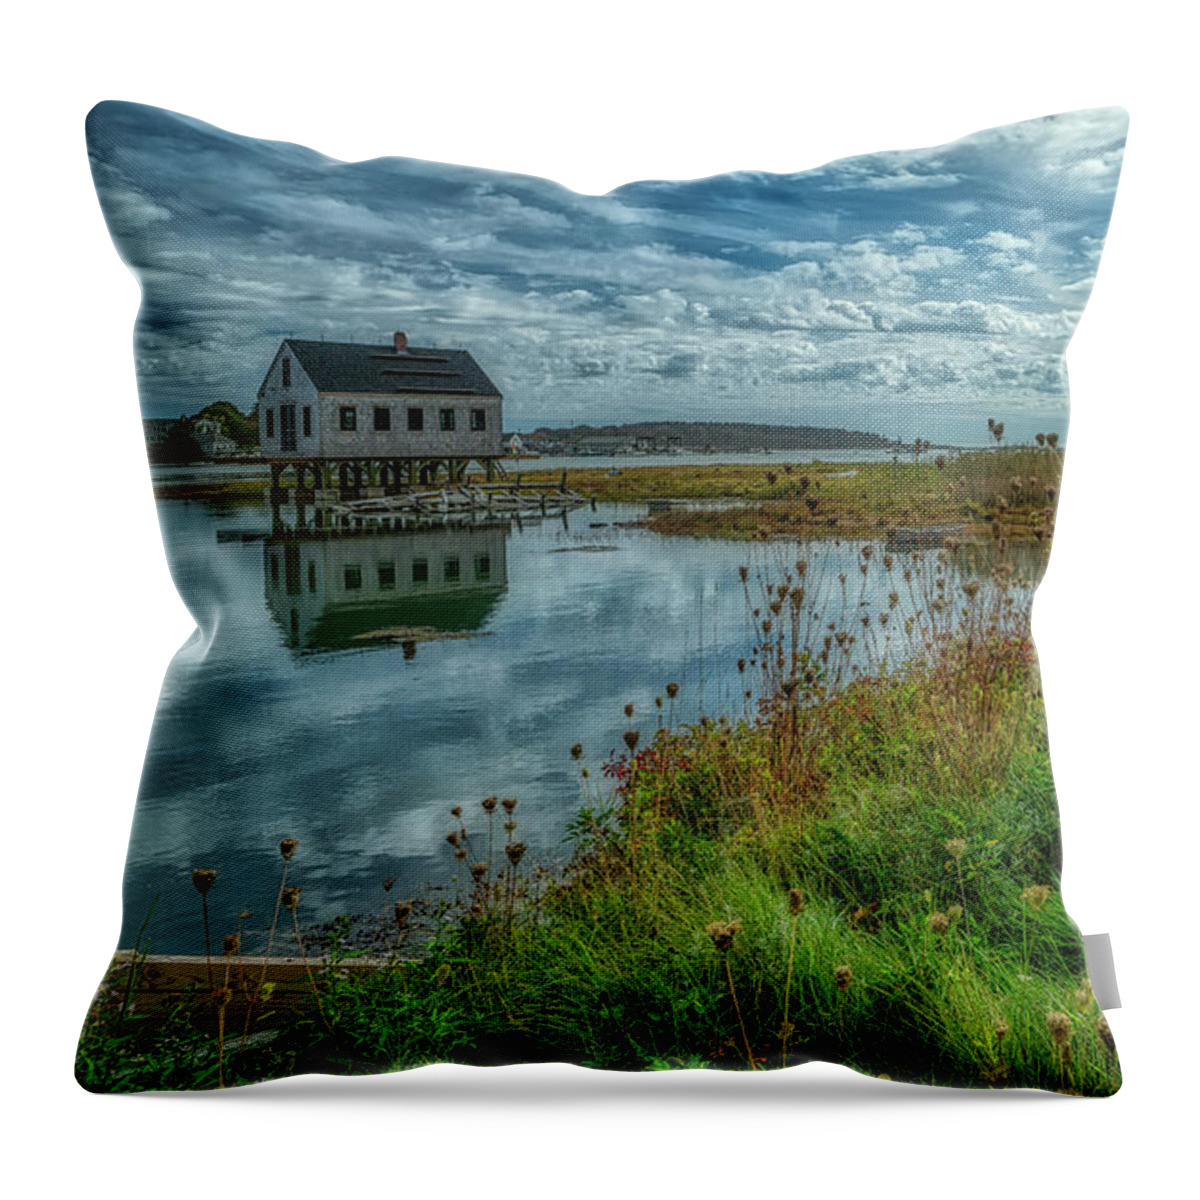 Cape Porpoise Throw Pillow featuring the photograph Cape Porpoise Fish House by Penny Polakoff